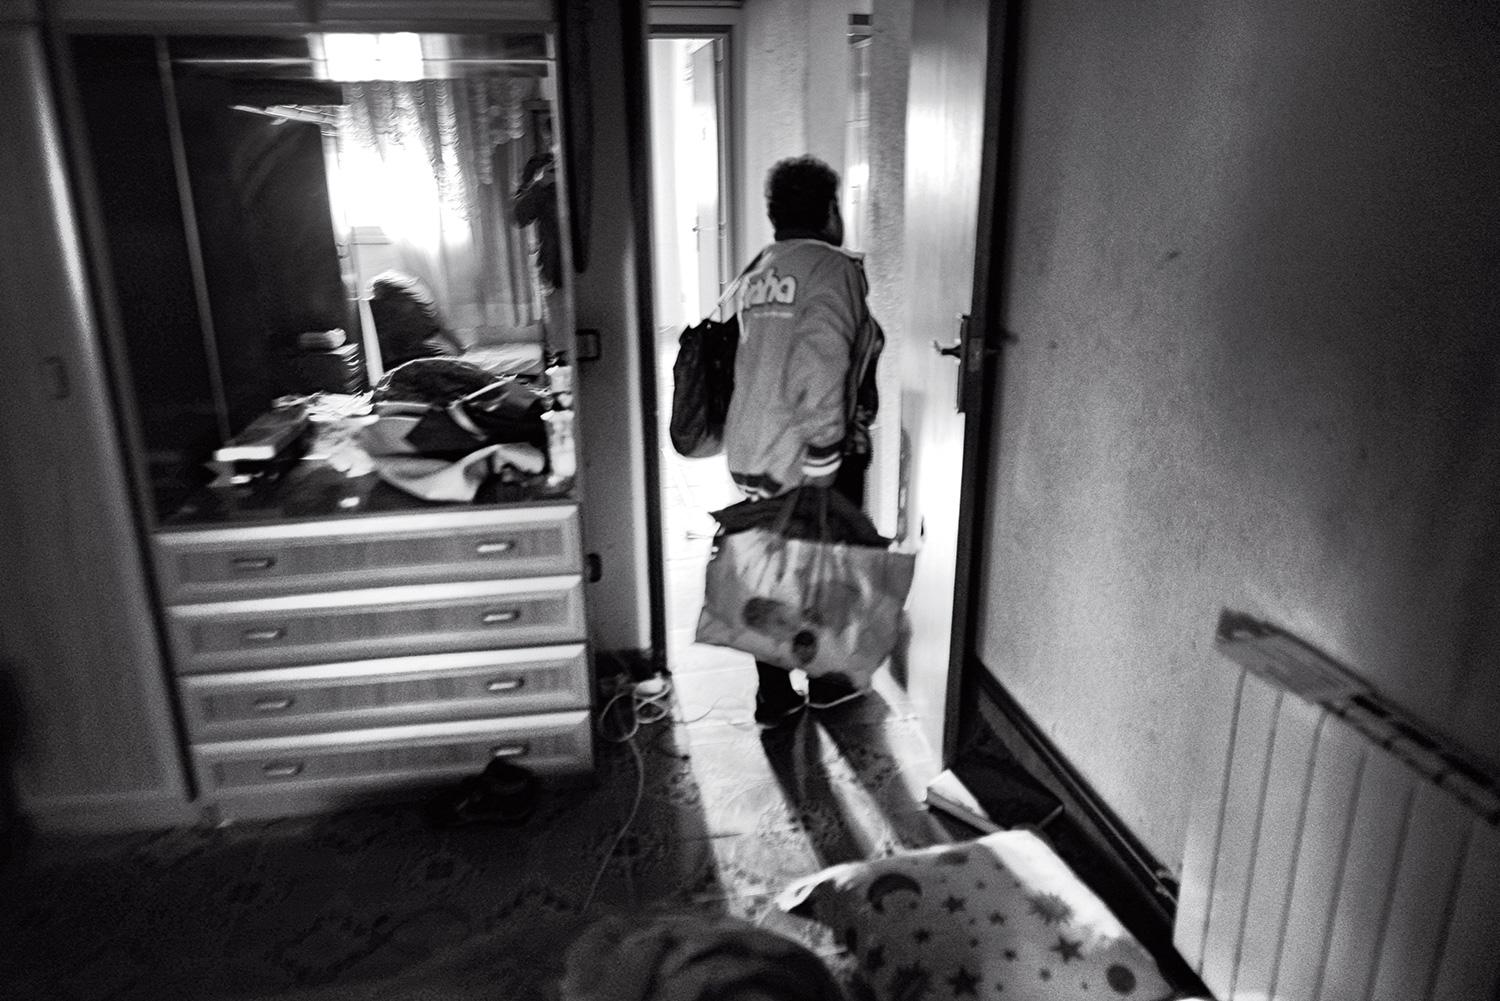 A woman picks up her clothes from her room after receiving an eviction notice in Terrassa, Spain, October 19, 2012.